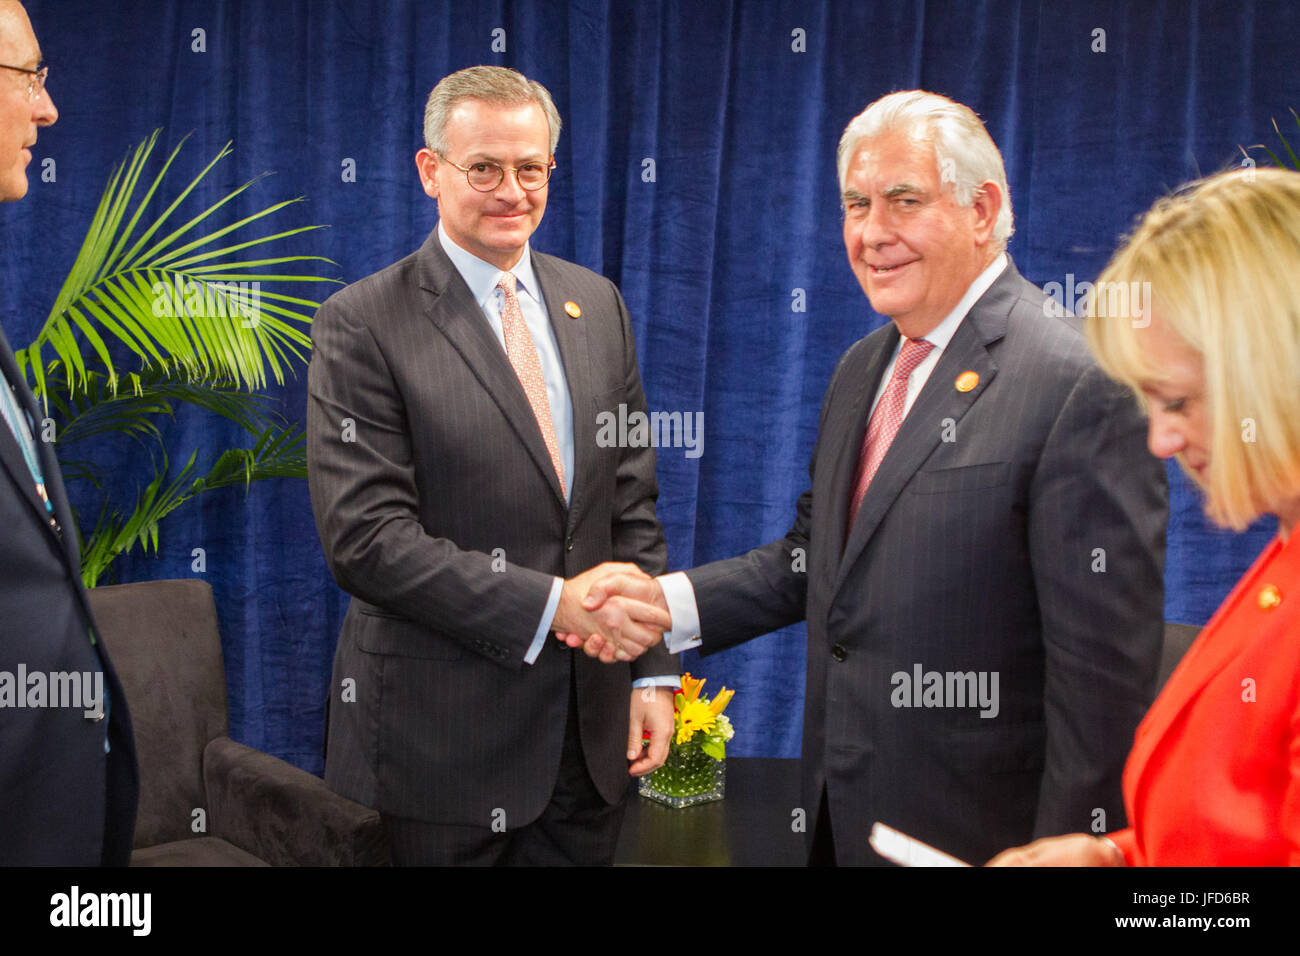 U.S. Secretary of State Rex Tillerson meets with Costa Rican Foreign Minister Gonzalez Sanz during the Conference for Prosperity and Security in Central America, at Florida International University, in Miami, Florida, on June 15, 2017. Stock Photo